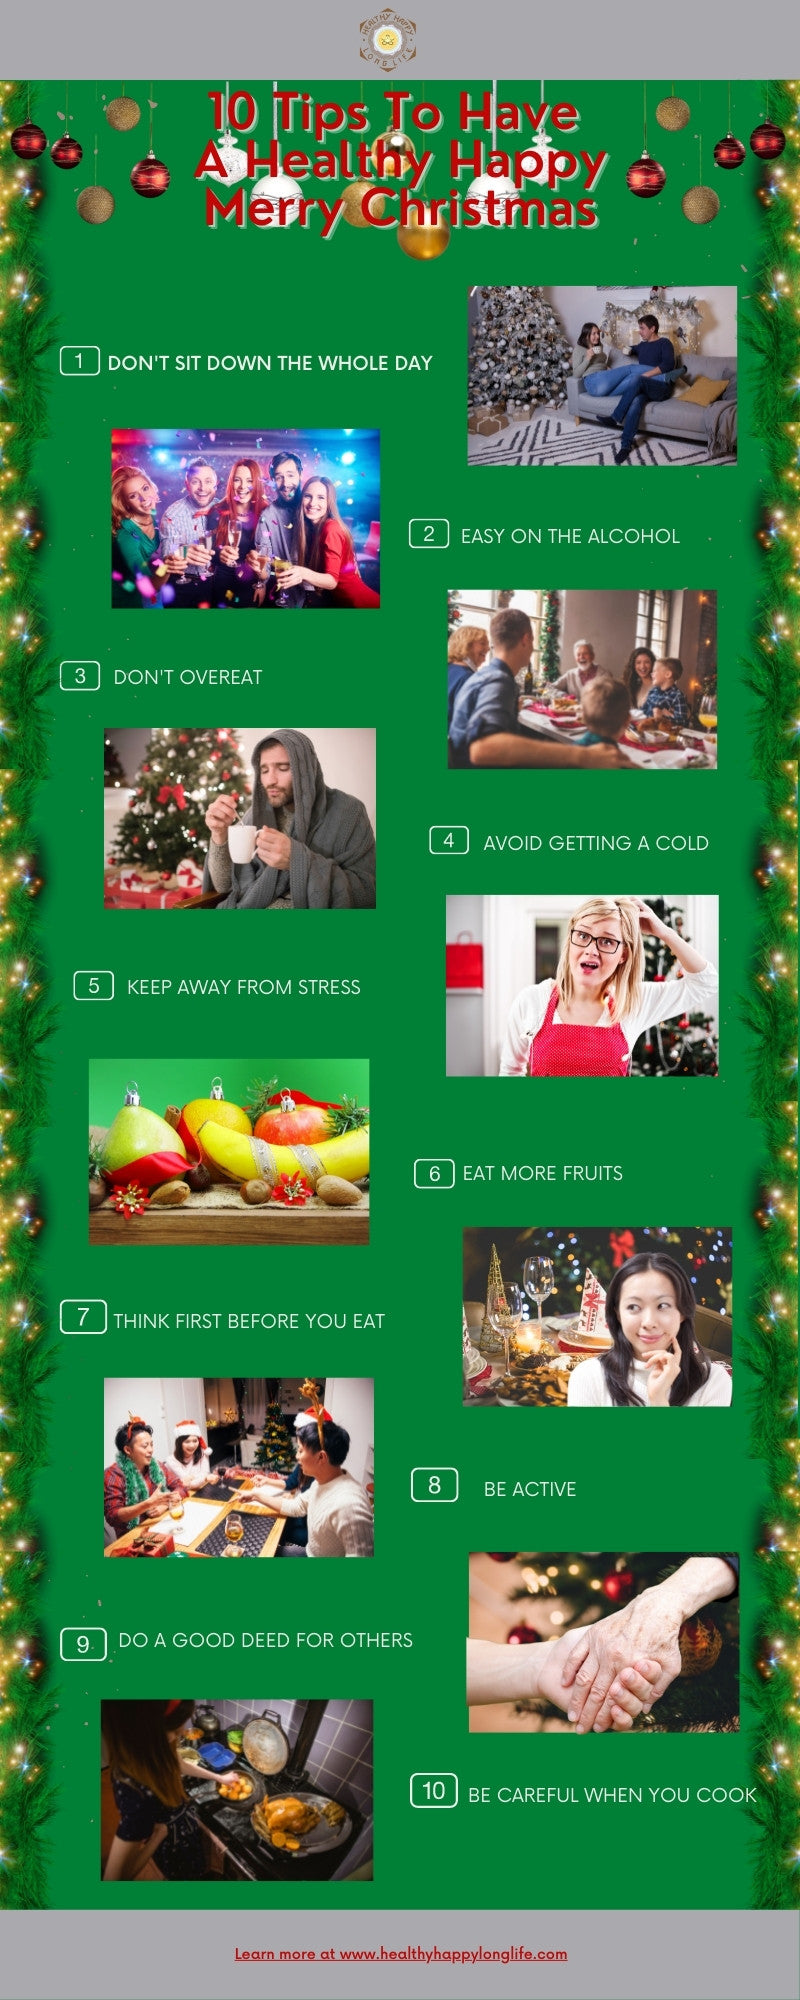 10 Tips To Have A Healthy Happy Merry Christmas 